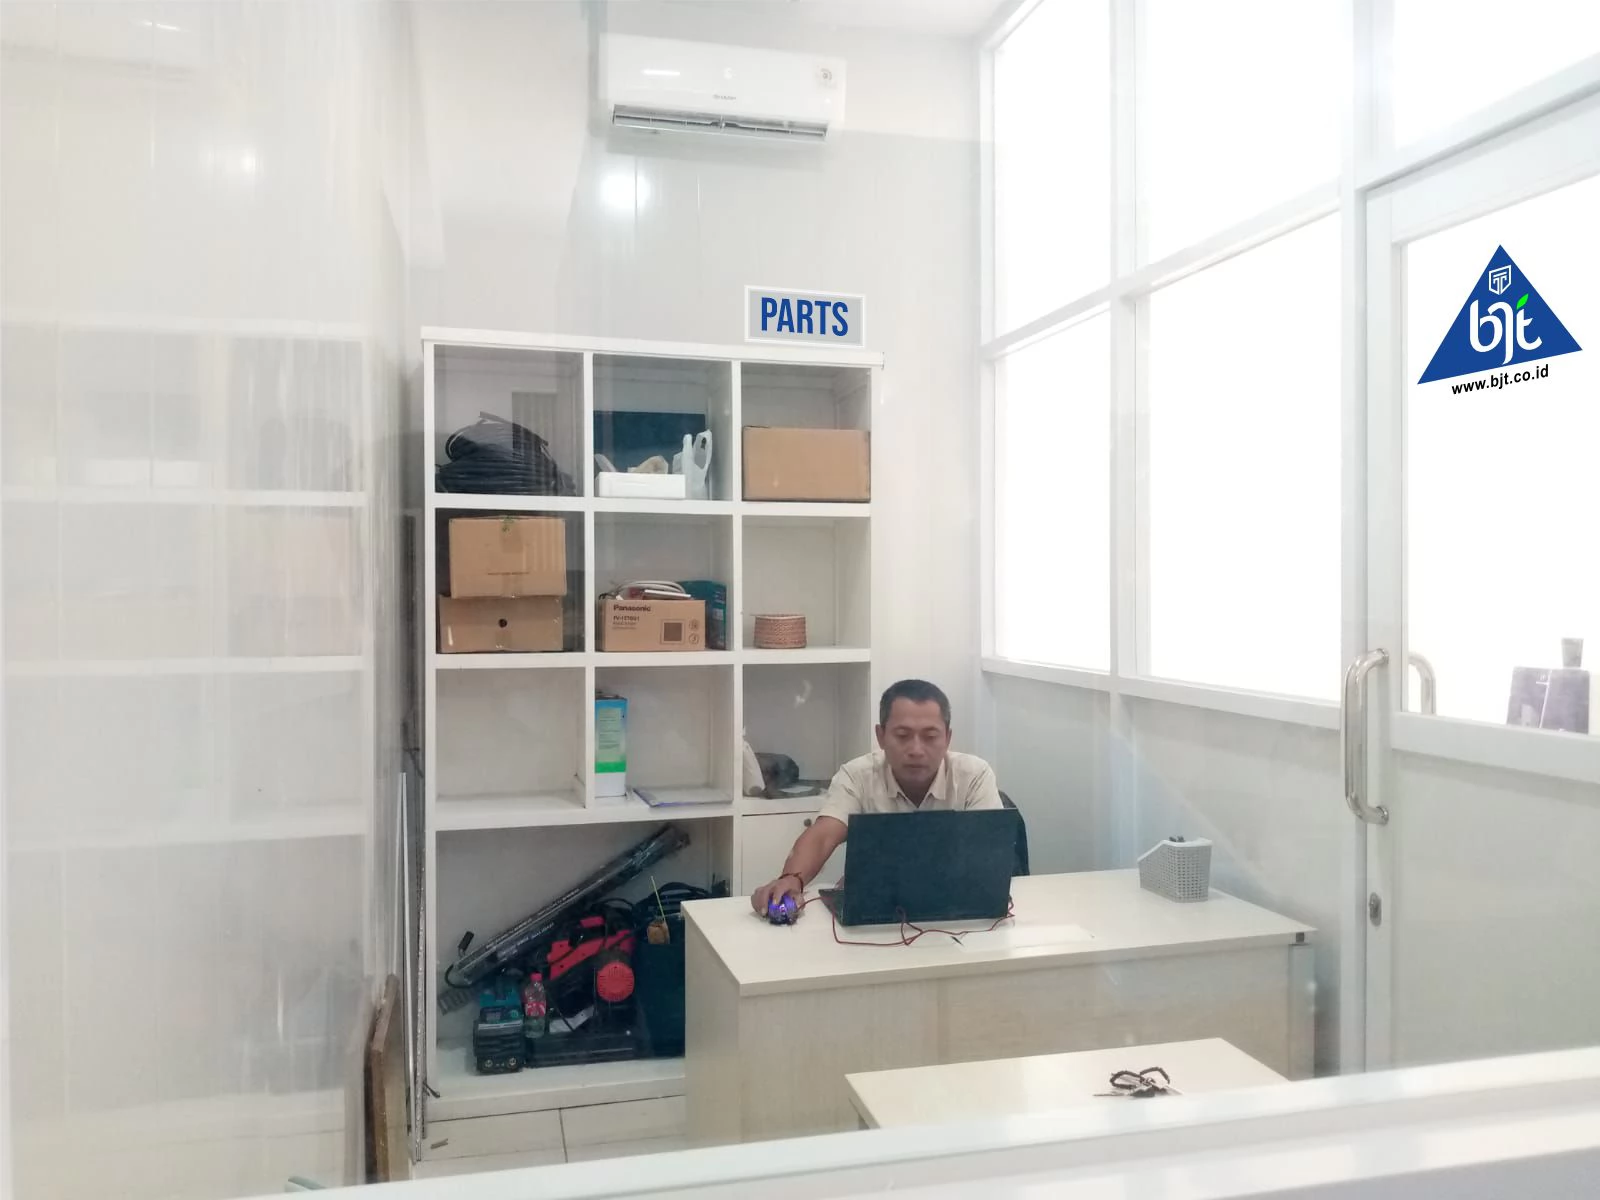 BJT STORE OFFICE